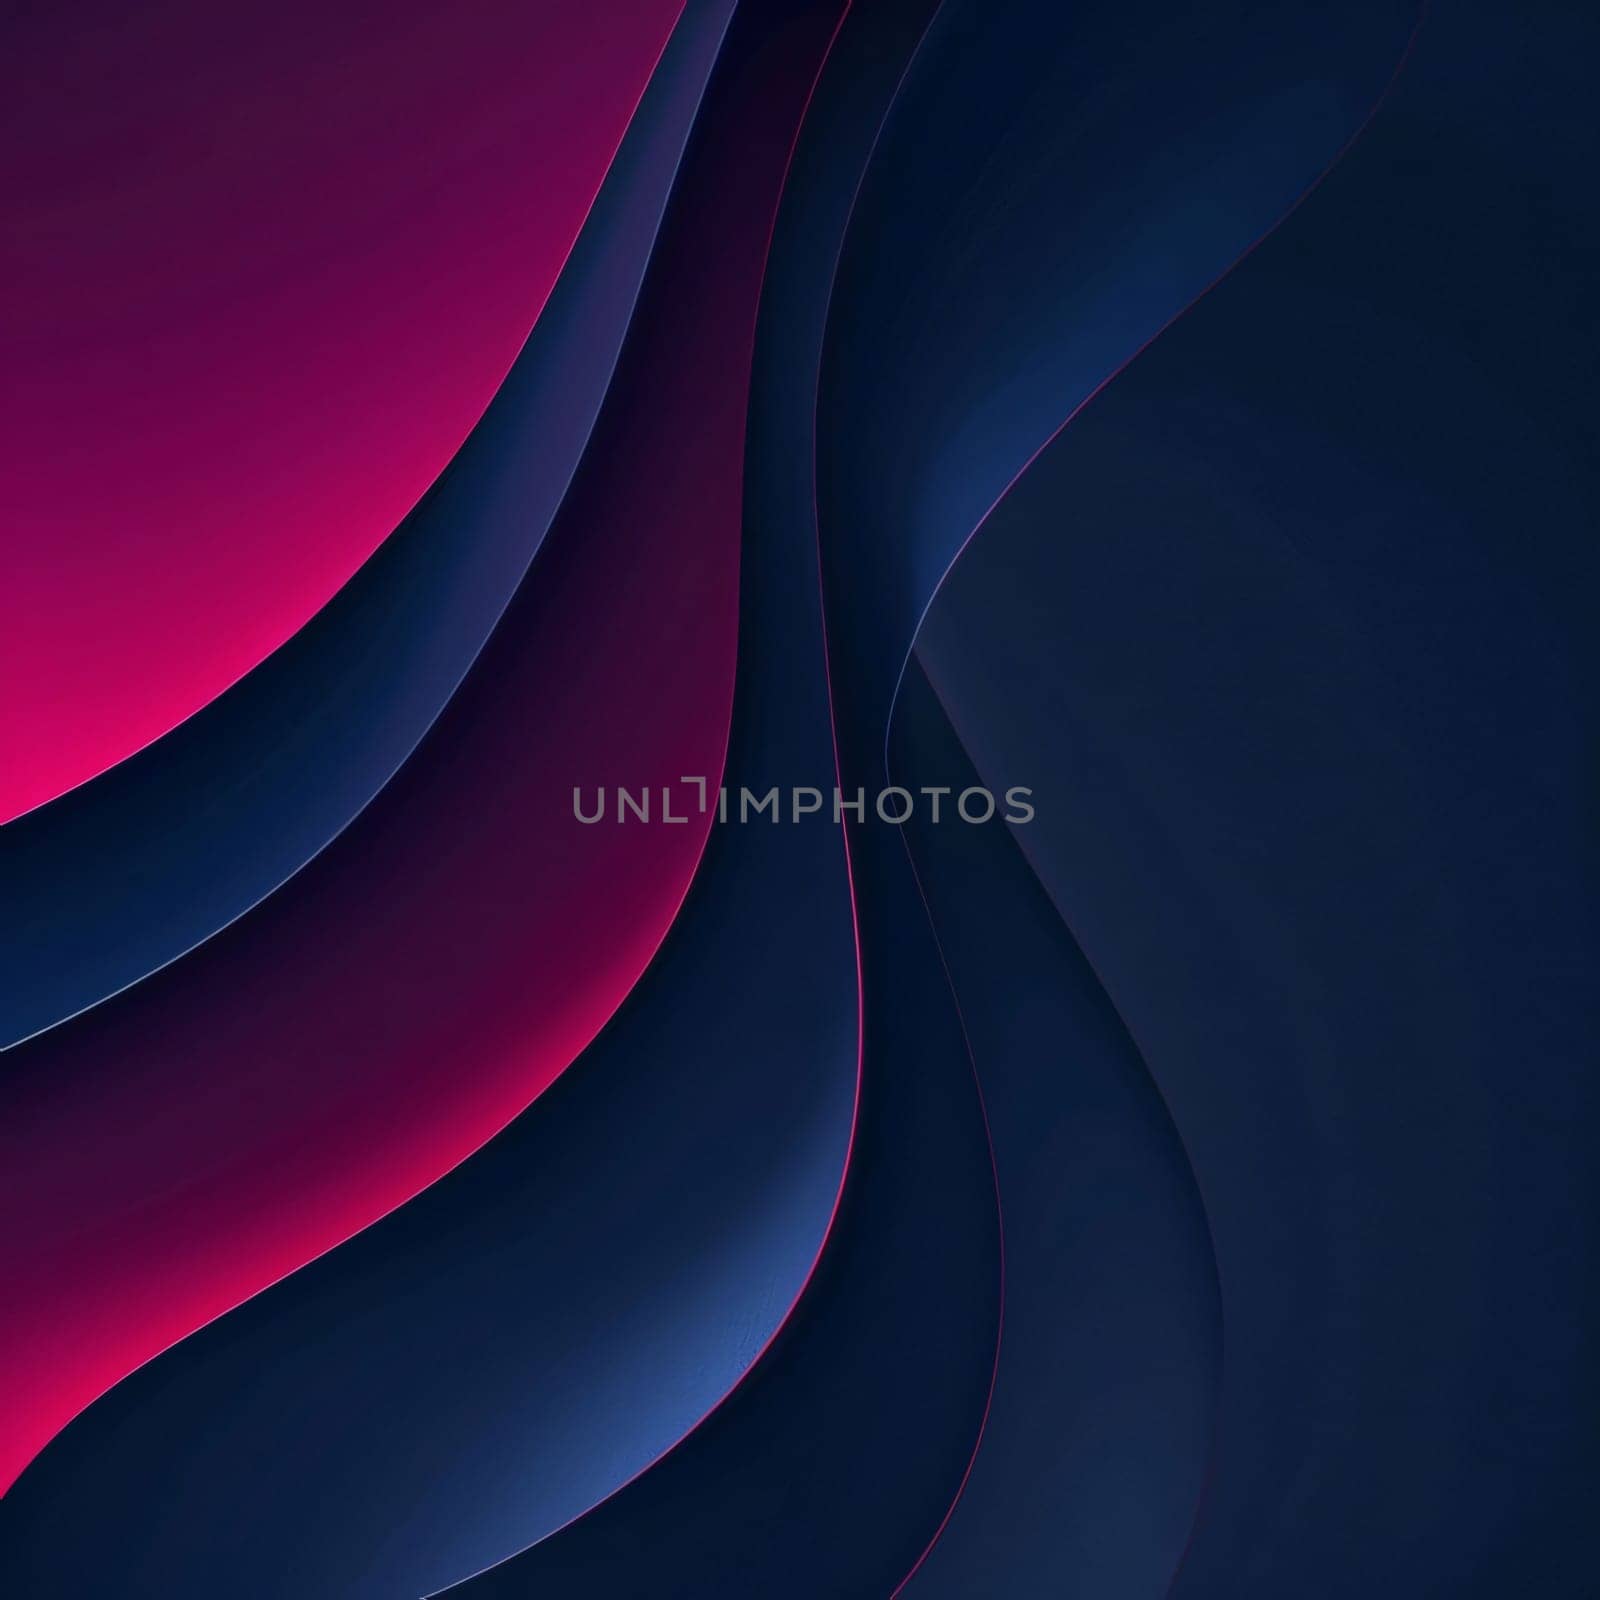 Abstract background design: Abstract background with blue and pink wavy lines. Vector illustration.